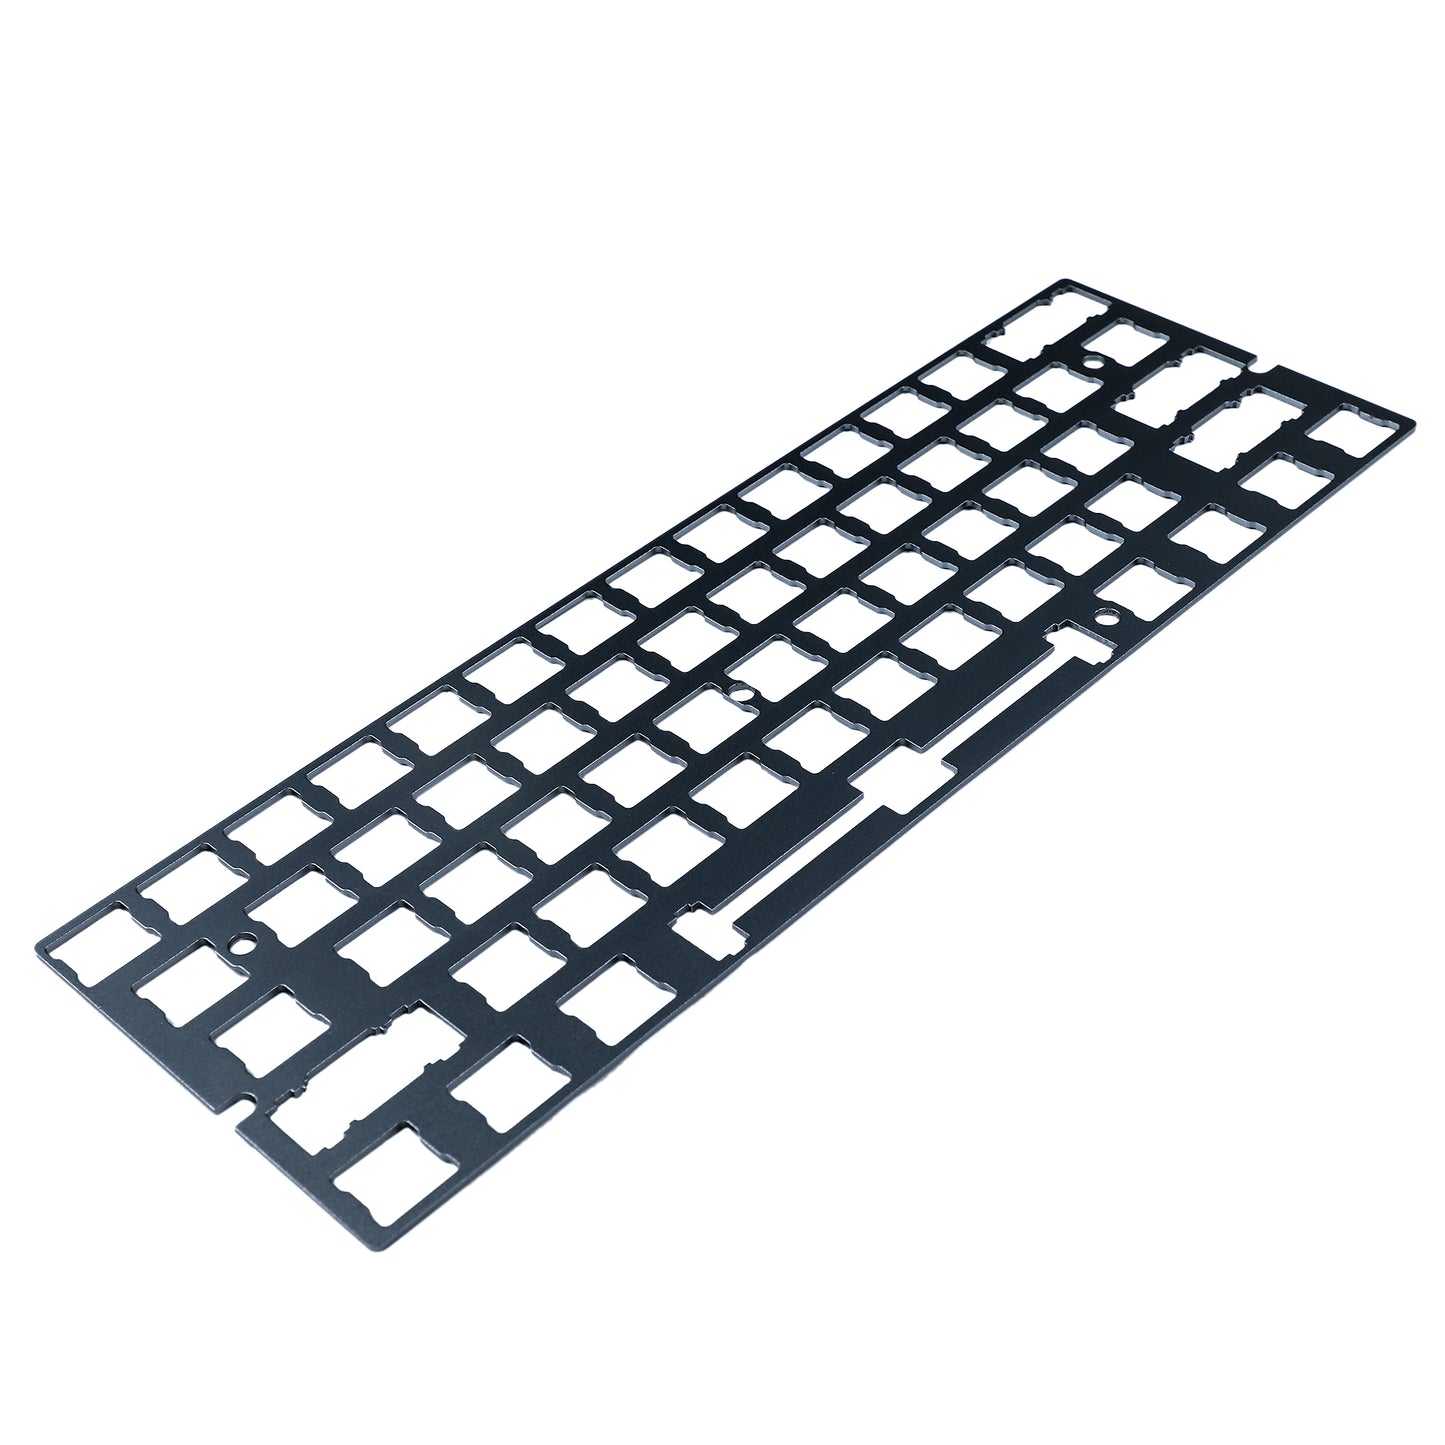 Costar Stabilizers Aluminum Positioning Plate(GH60 60% Using/ANSI 61 Layout Supported Only)